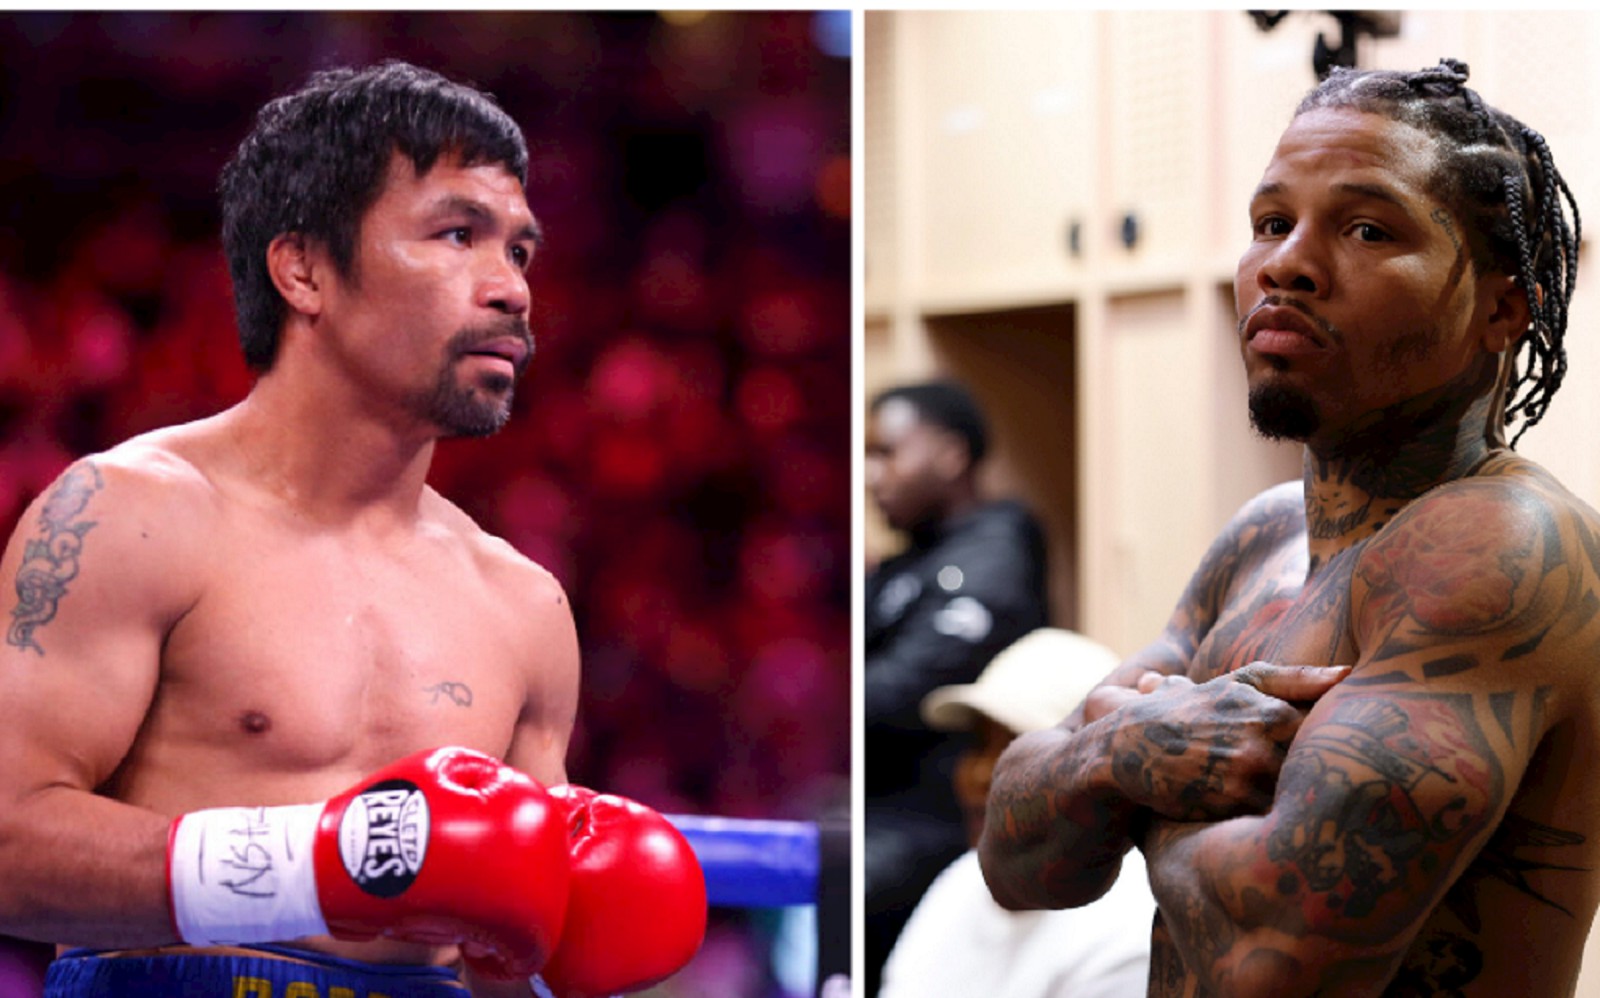 Manny Pacquiao coming out of retirement to face Gervonta Davis